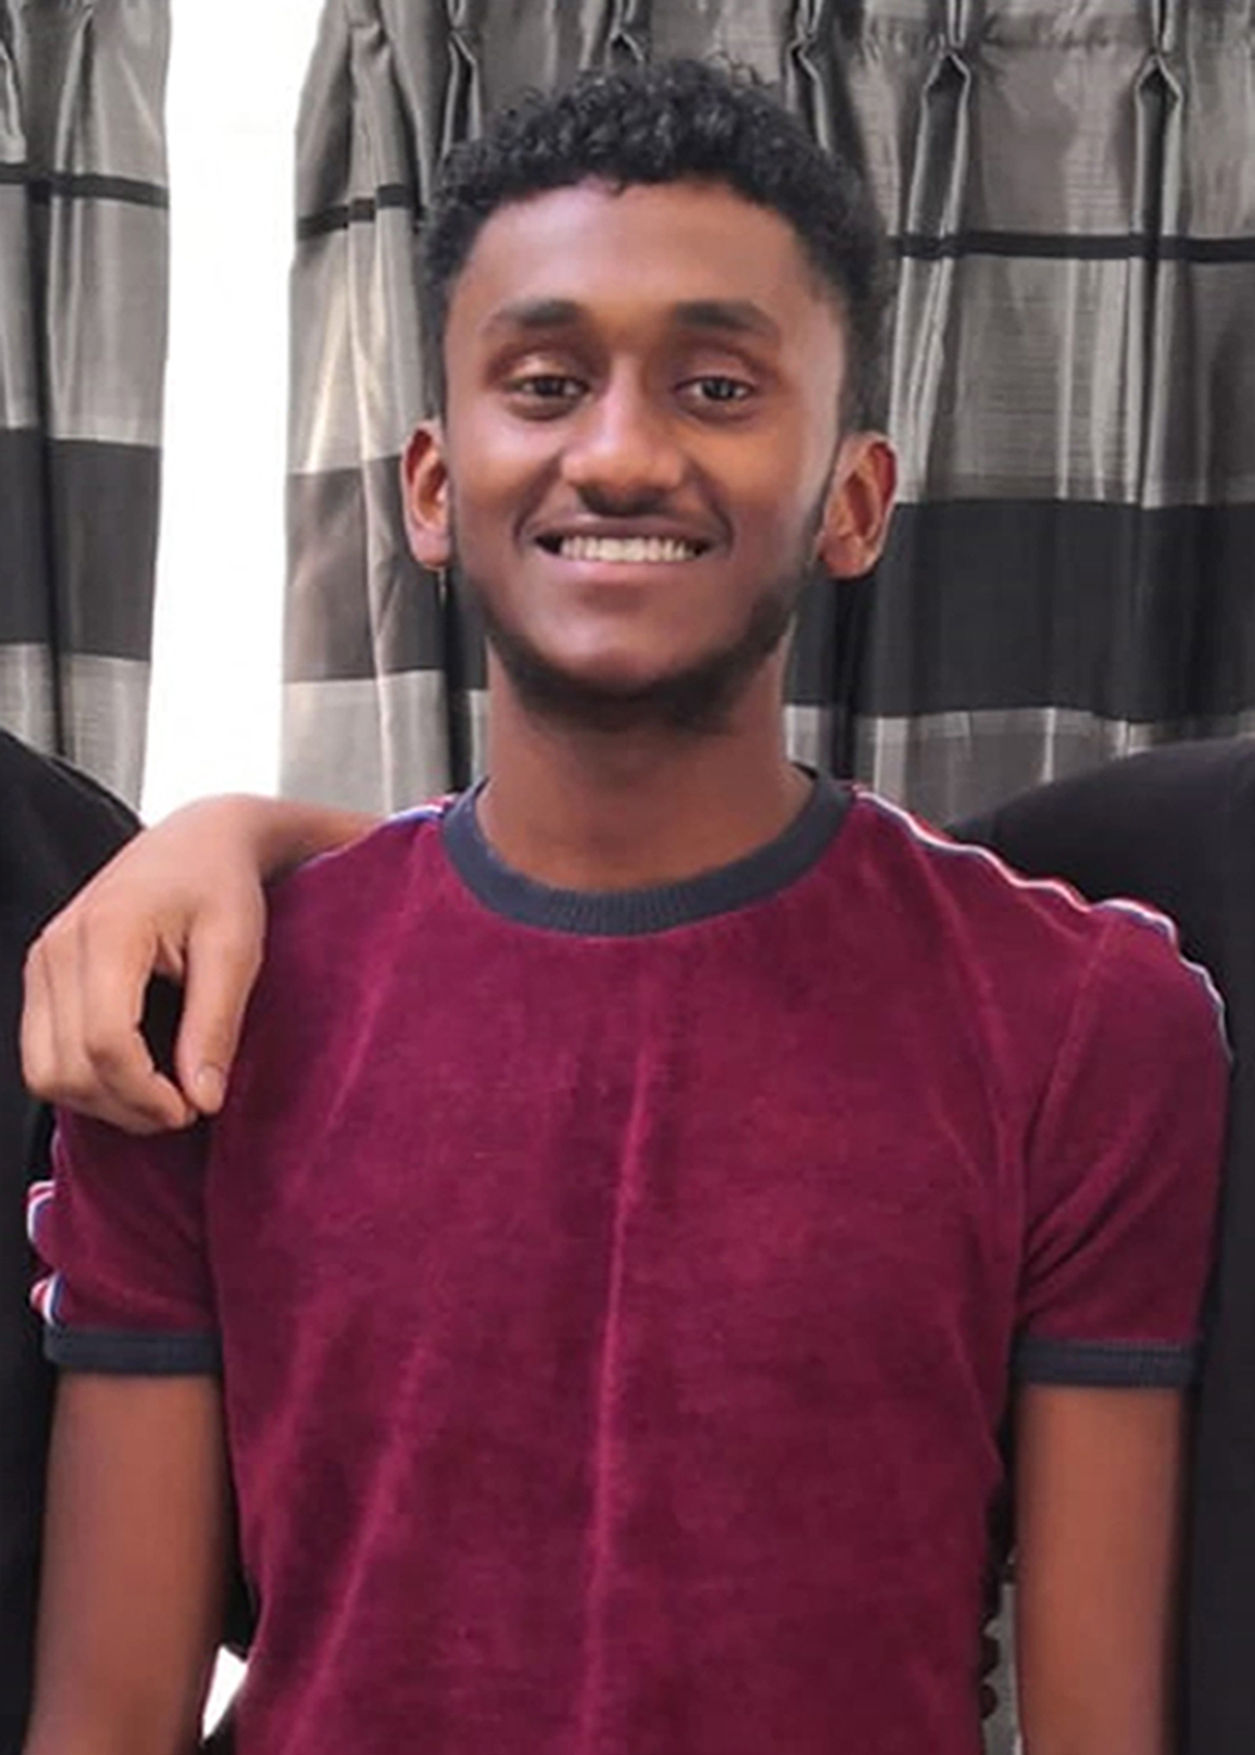 Undated family handout photo of Tashan Daniel. Alex Lanning, 22, has been jailed at the Old Bailey for life with a minimum term of 25 years for the murder of the talented athlete, who was stabbed at Hillingdon station, west London, last September on his